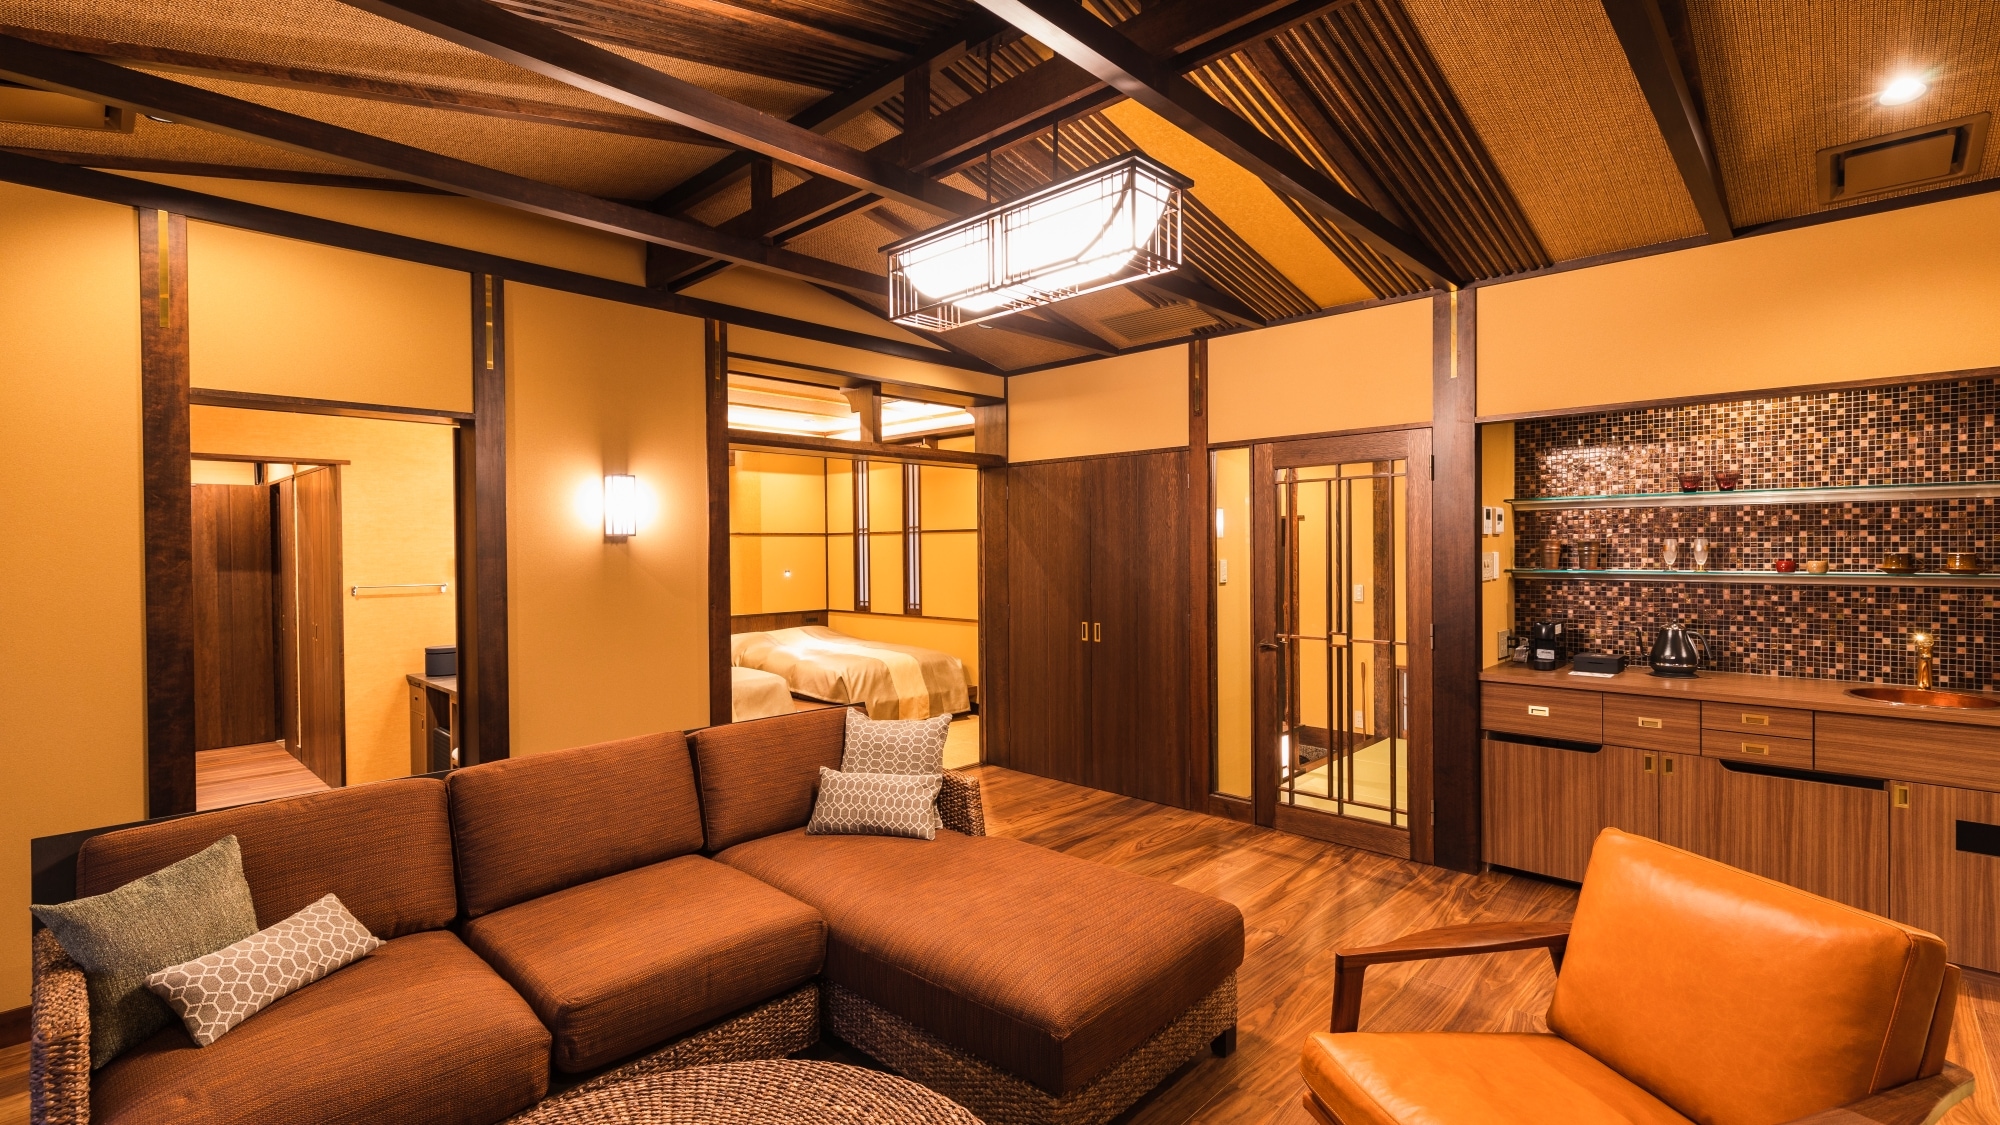 [Annex "Geckkan"] A living room with a Japanese atmosphere and Western comfort.